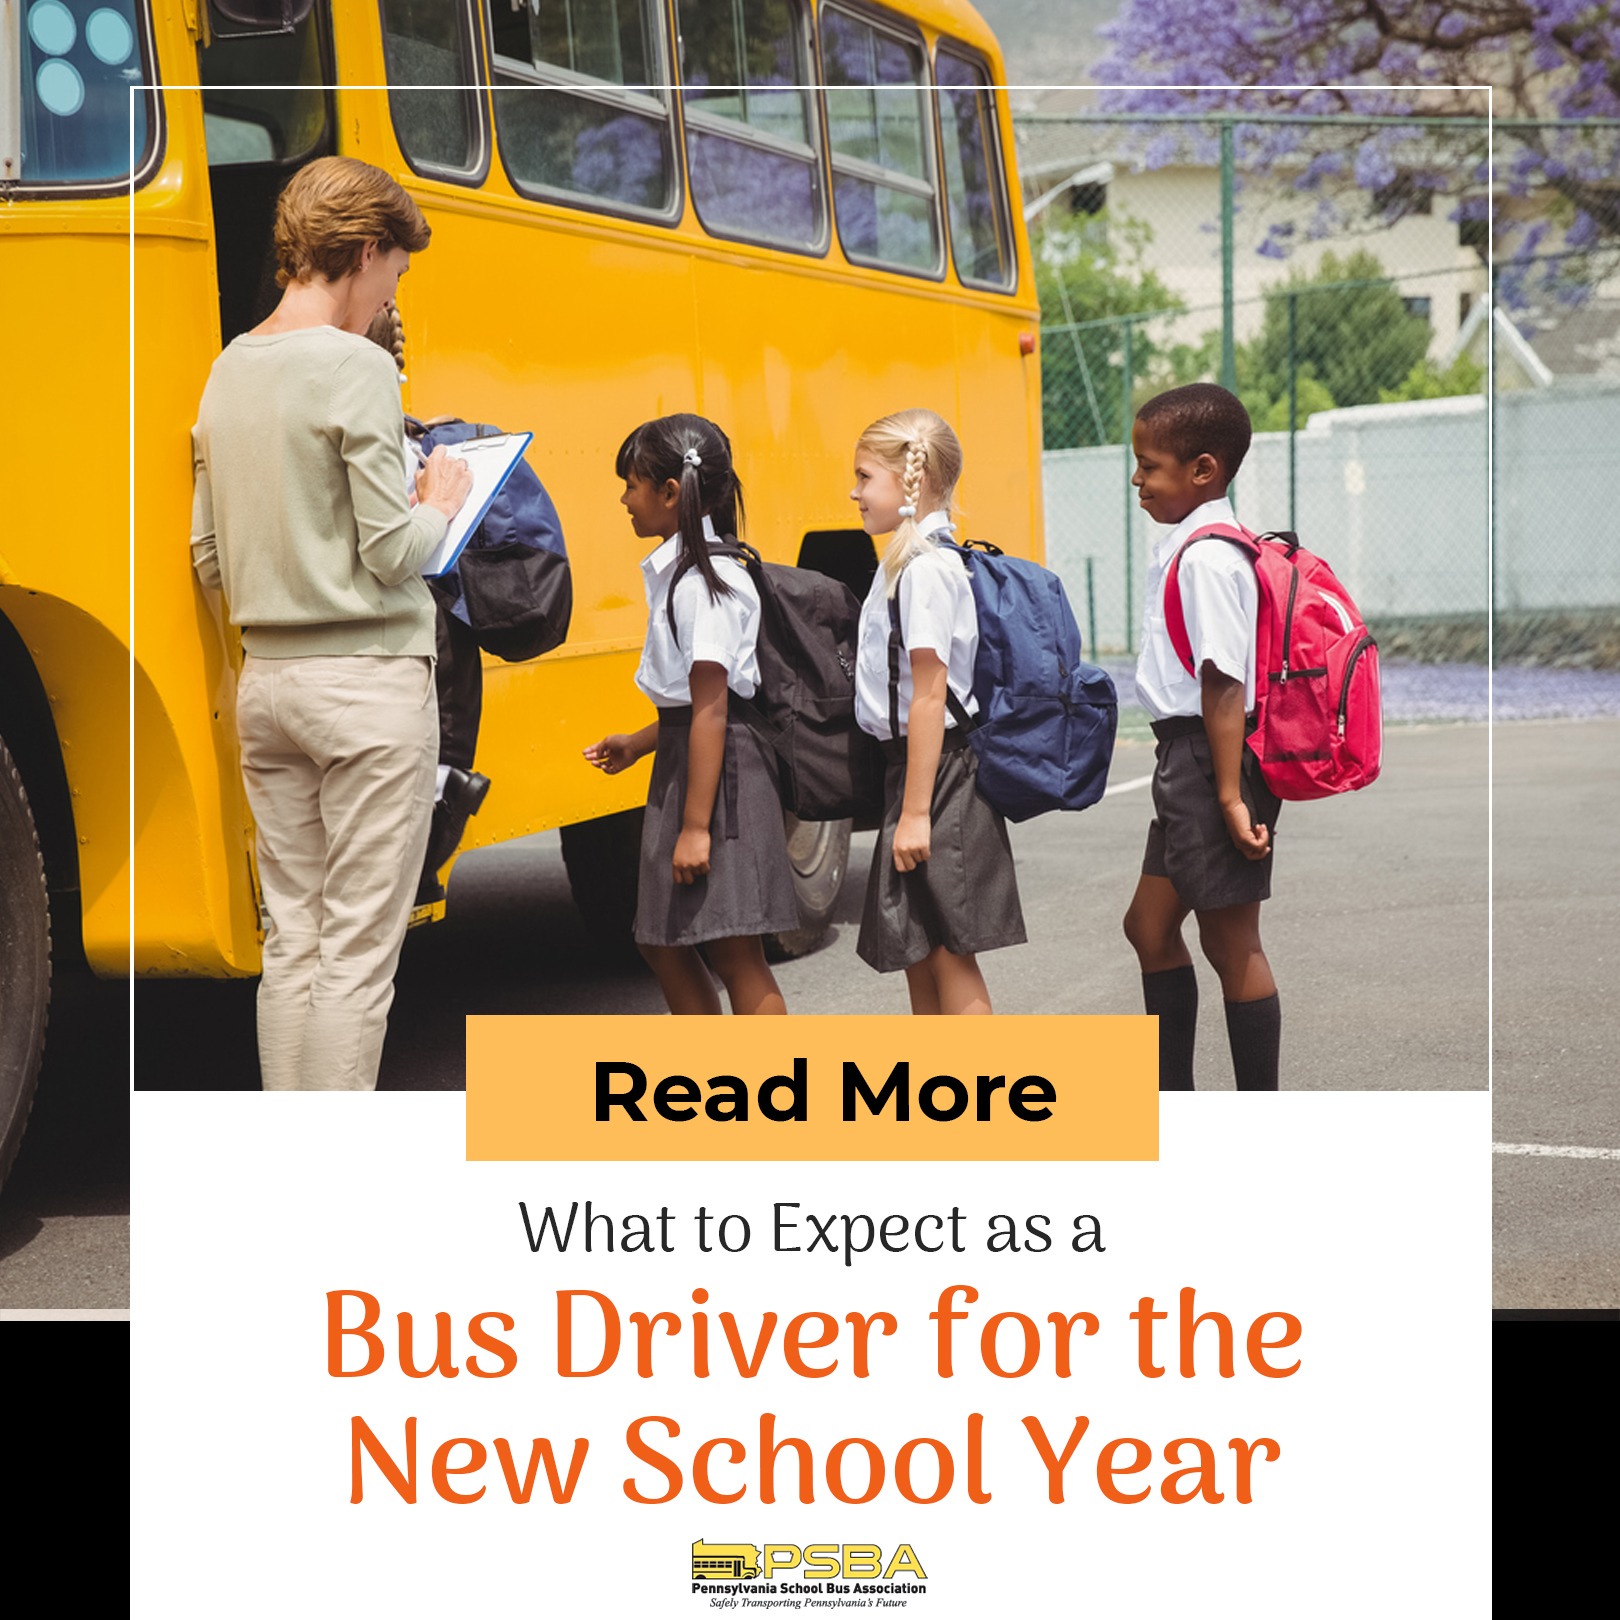 What to Expect as a Bus Driver for the New School Year